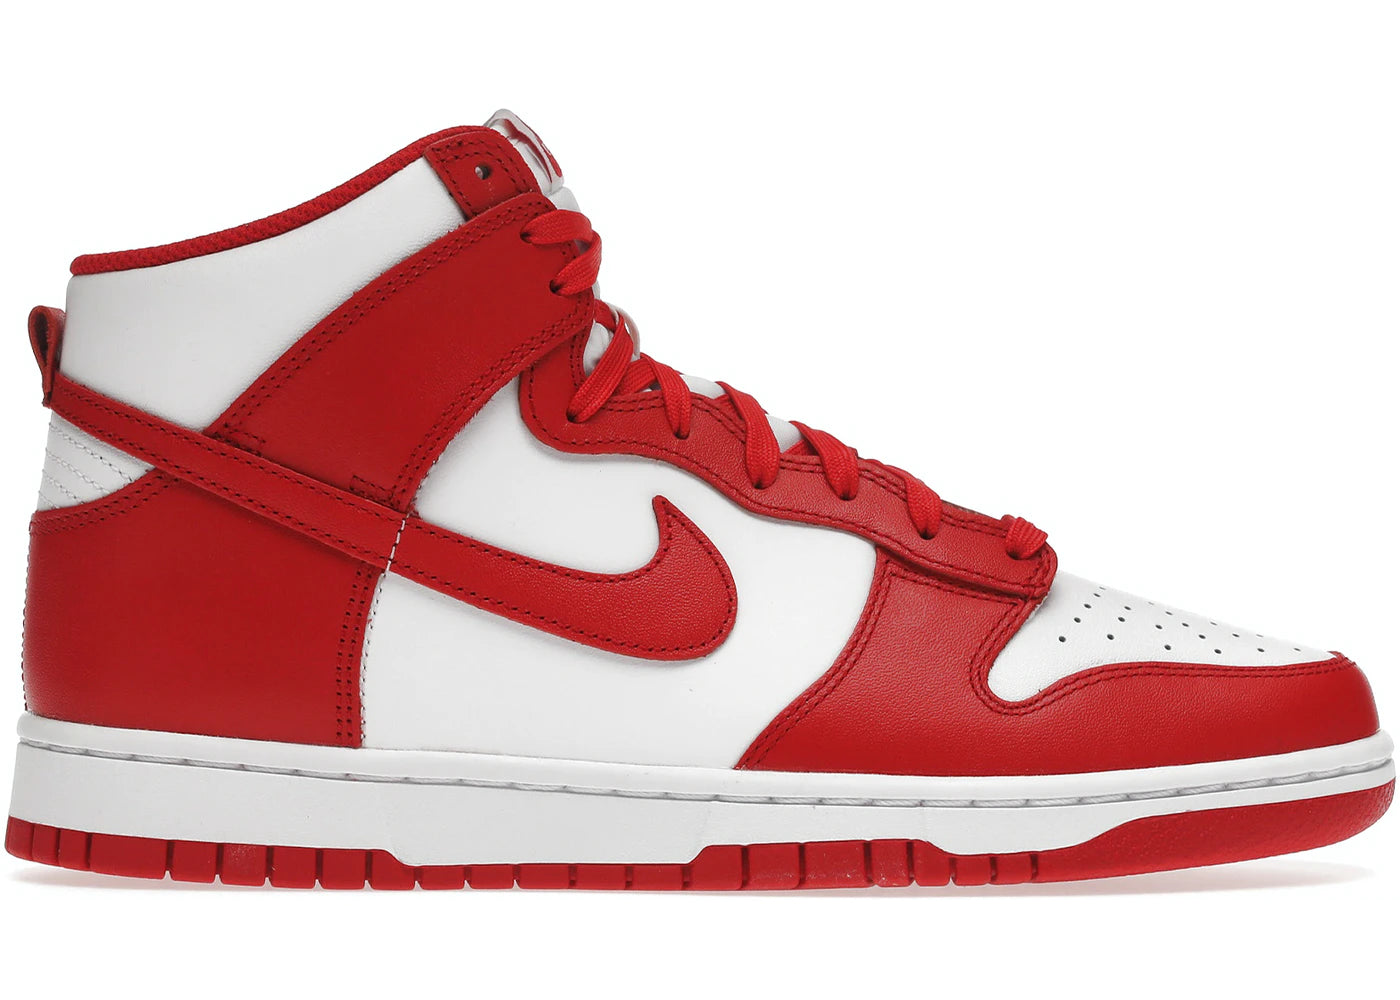 Nike Dunk High Championship White Red - Used